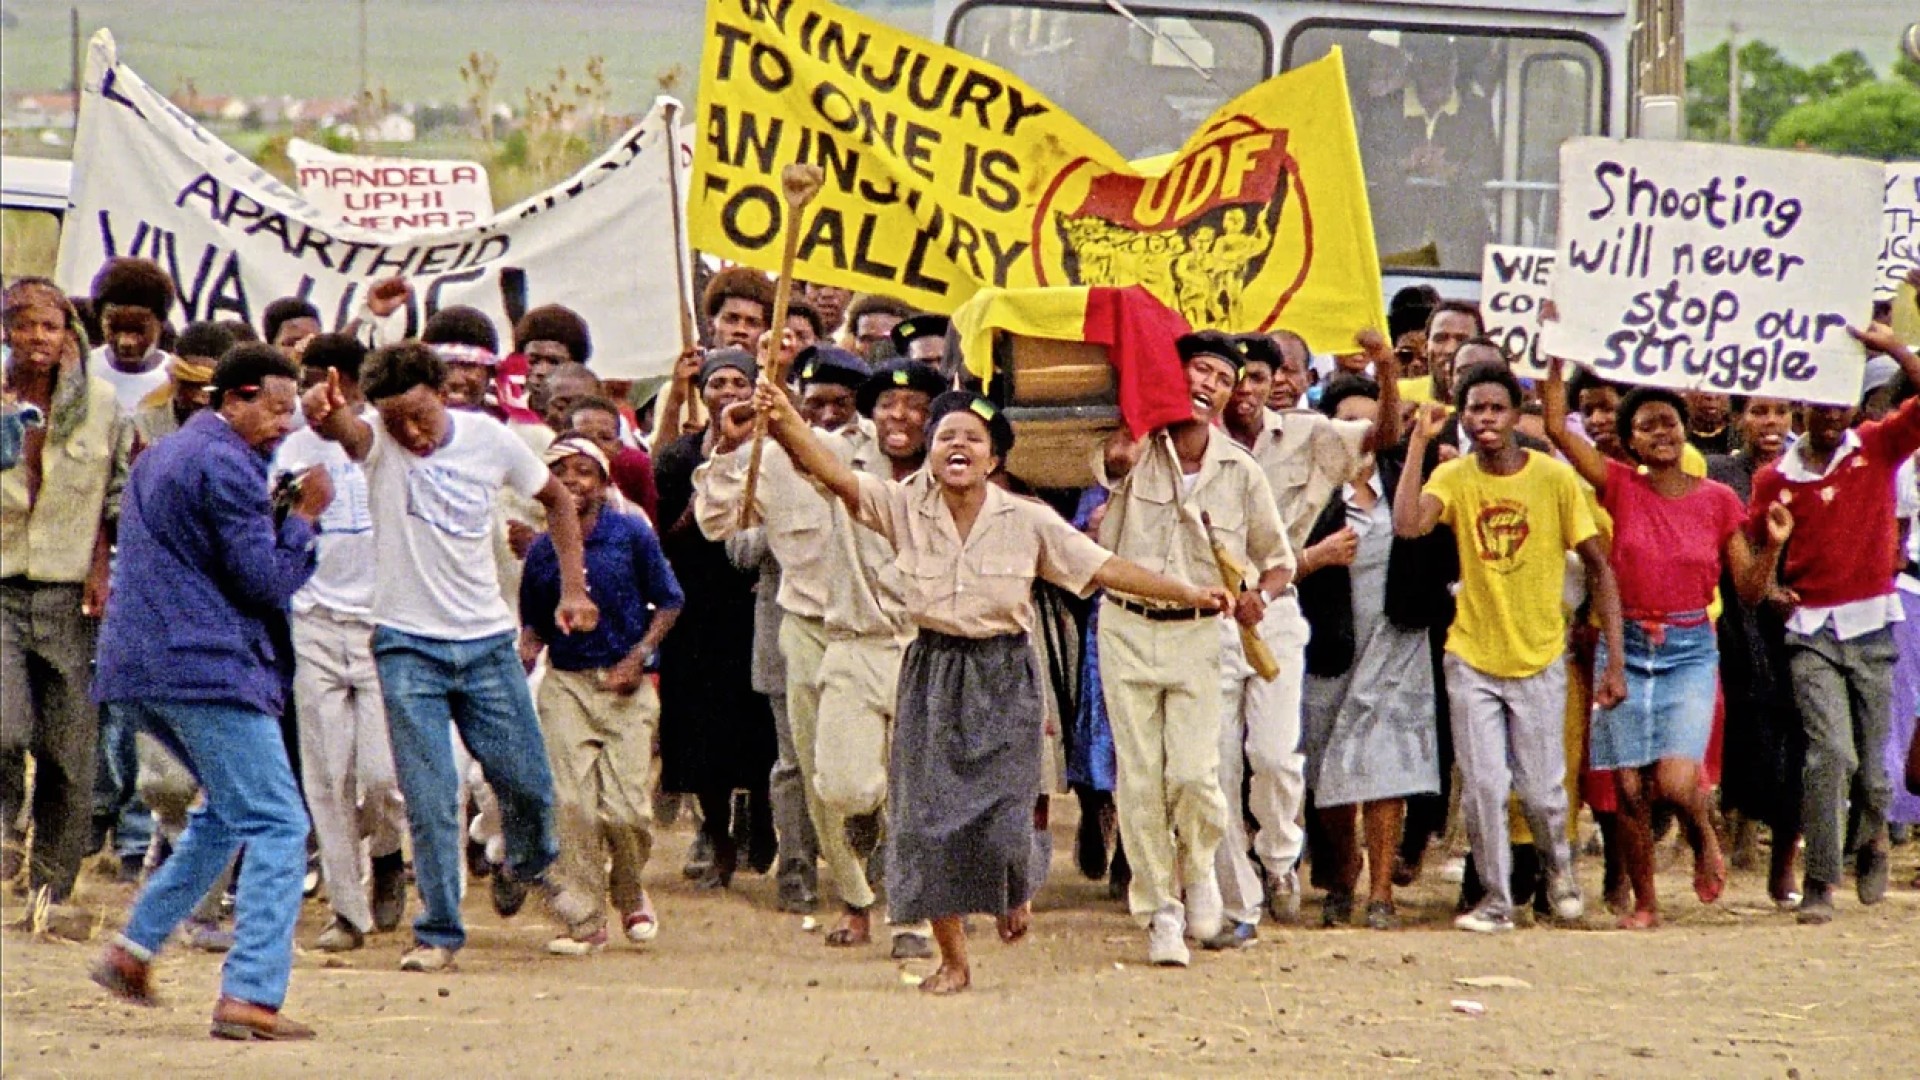 a-still-from-the-film-mapantsula-of-people-protesting